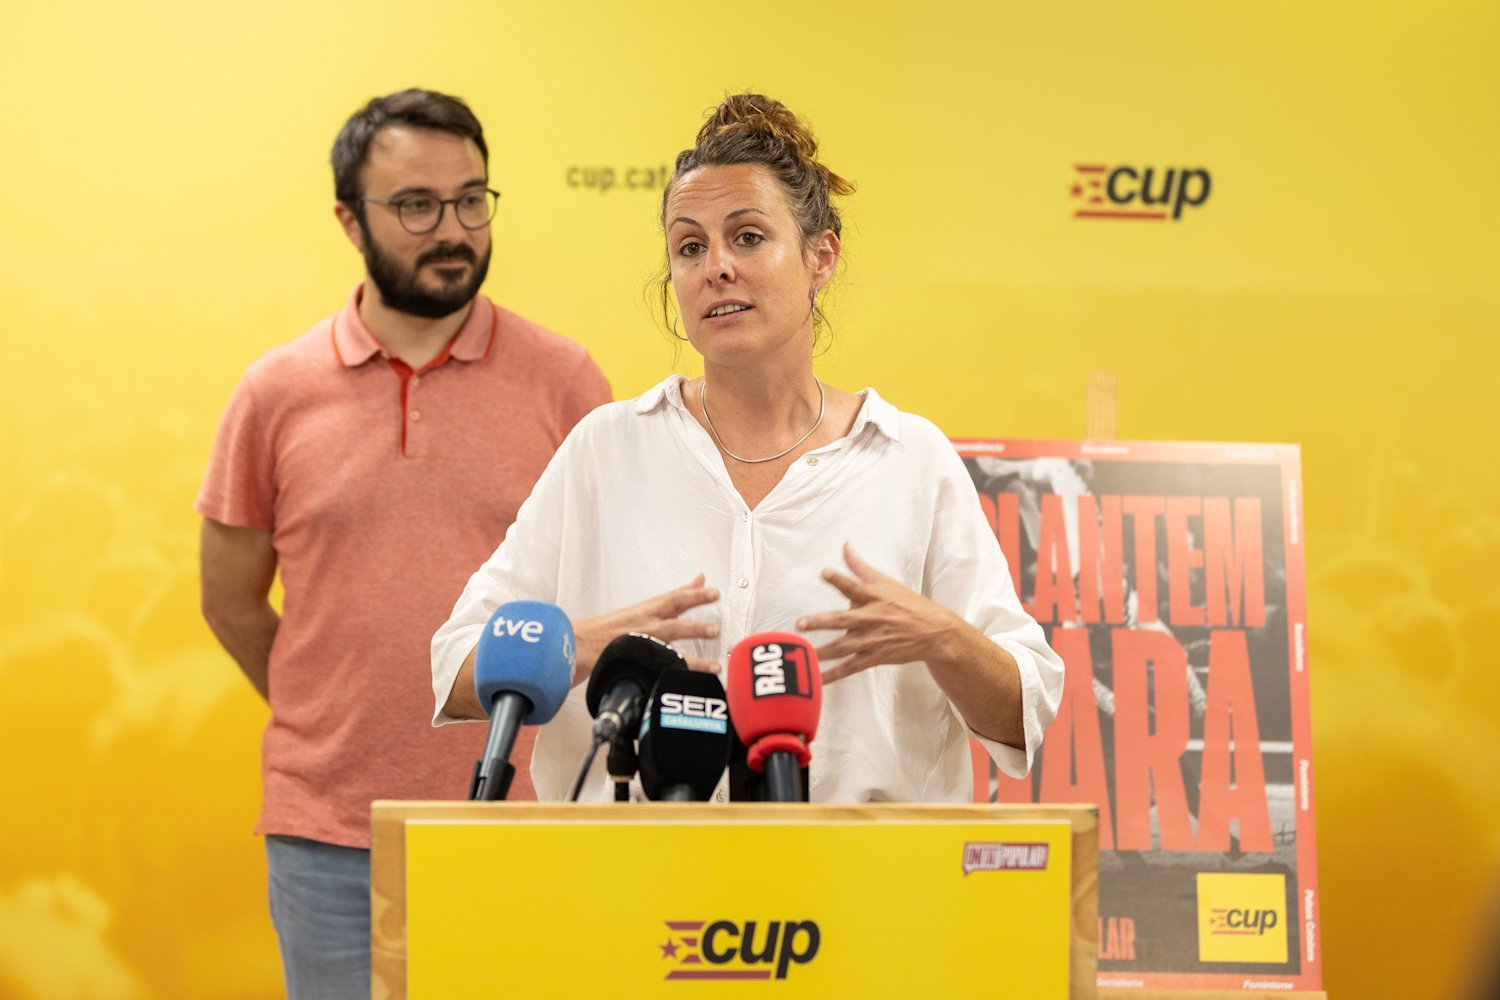 The CUP appeals to Comuns voters after Sumar's retreat from a Catalan referendum